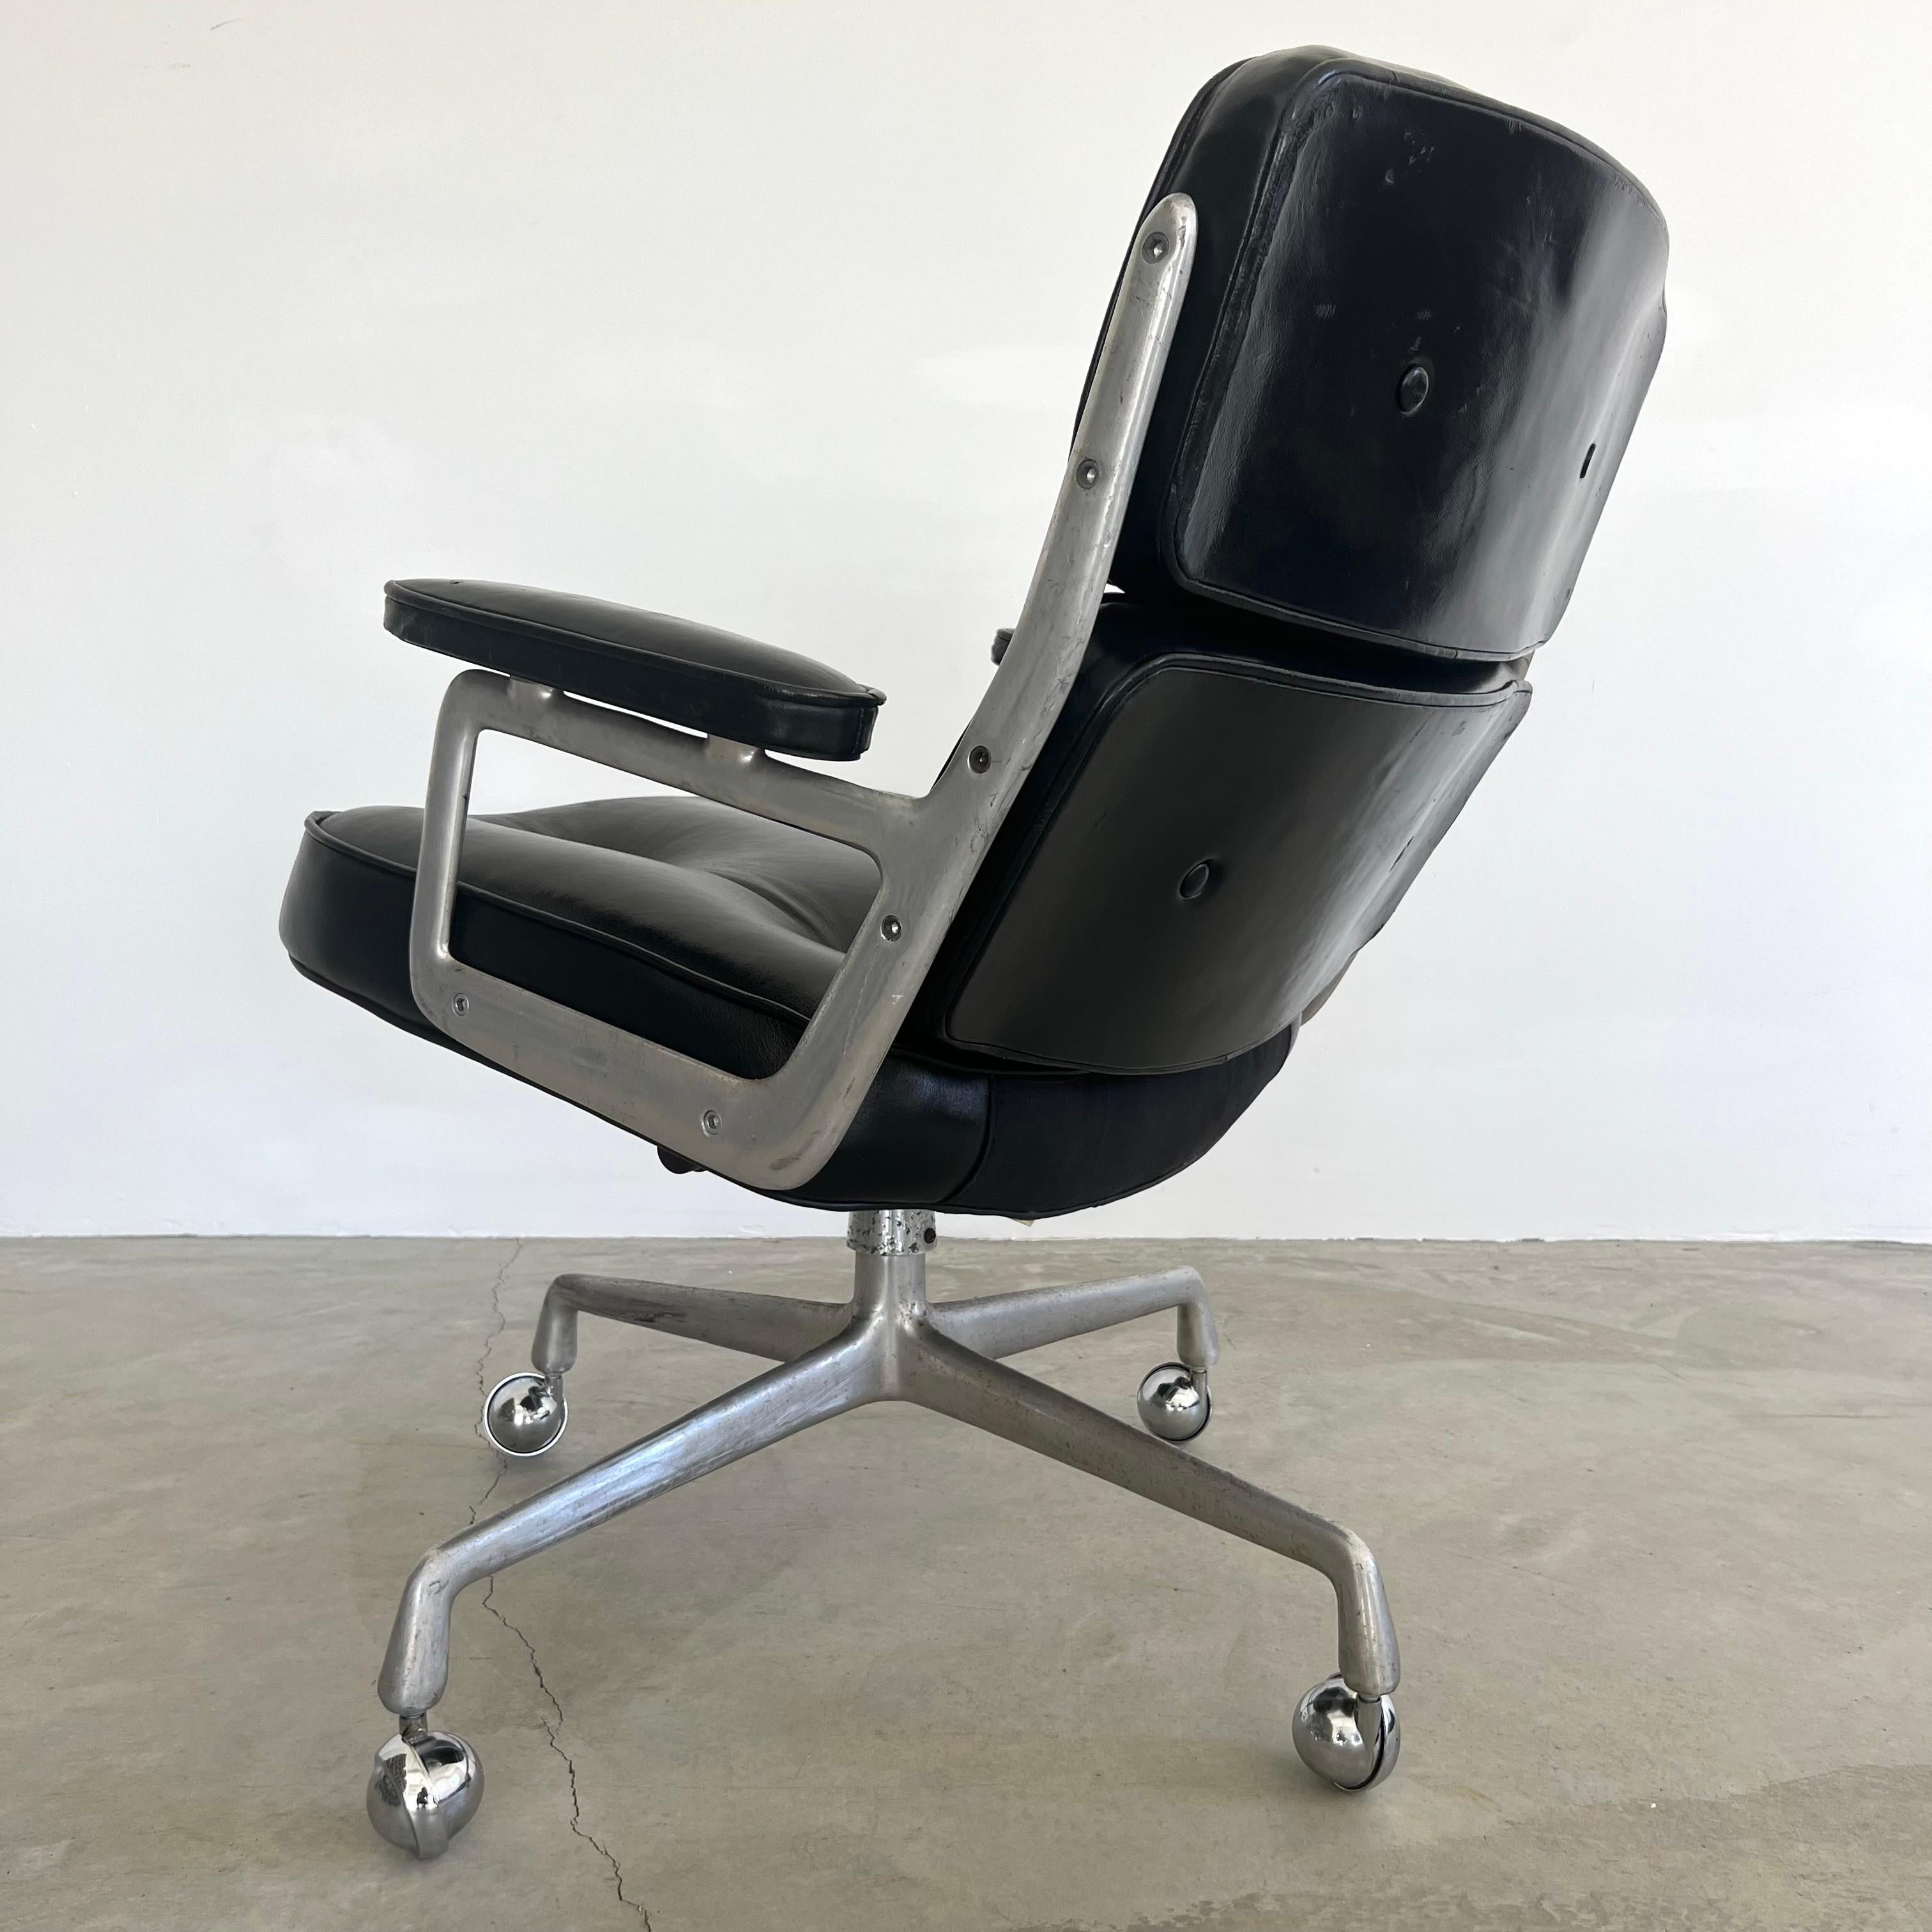 Late 20th Century Eames Time Life Chair in Black Leather for Herman Miller, 1980s USA For Sale